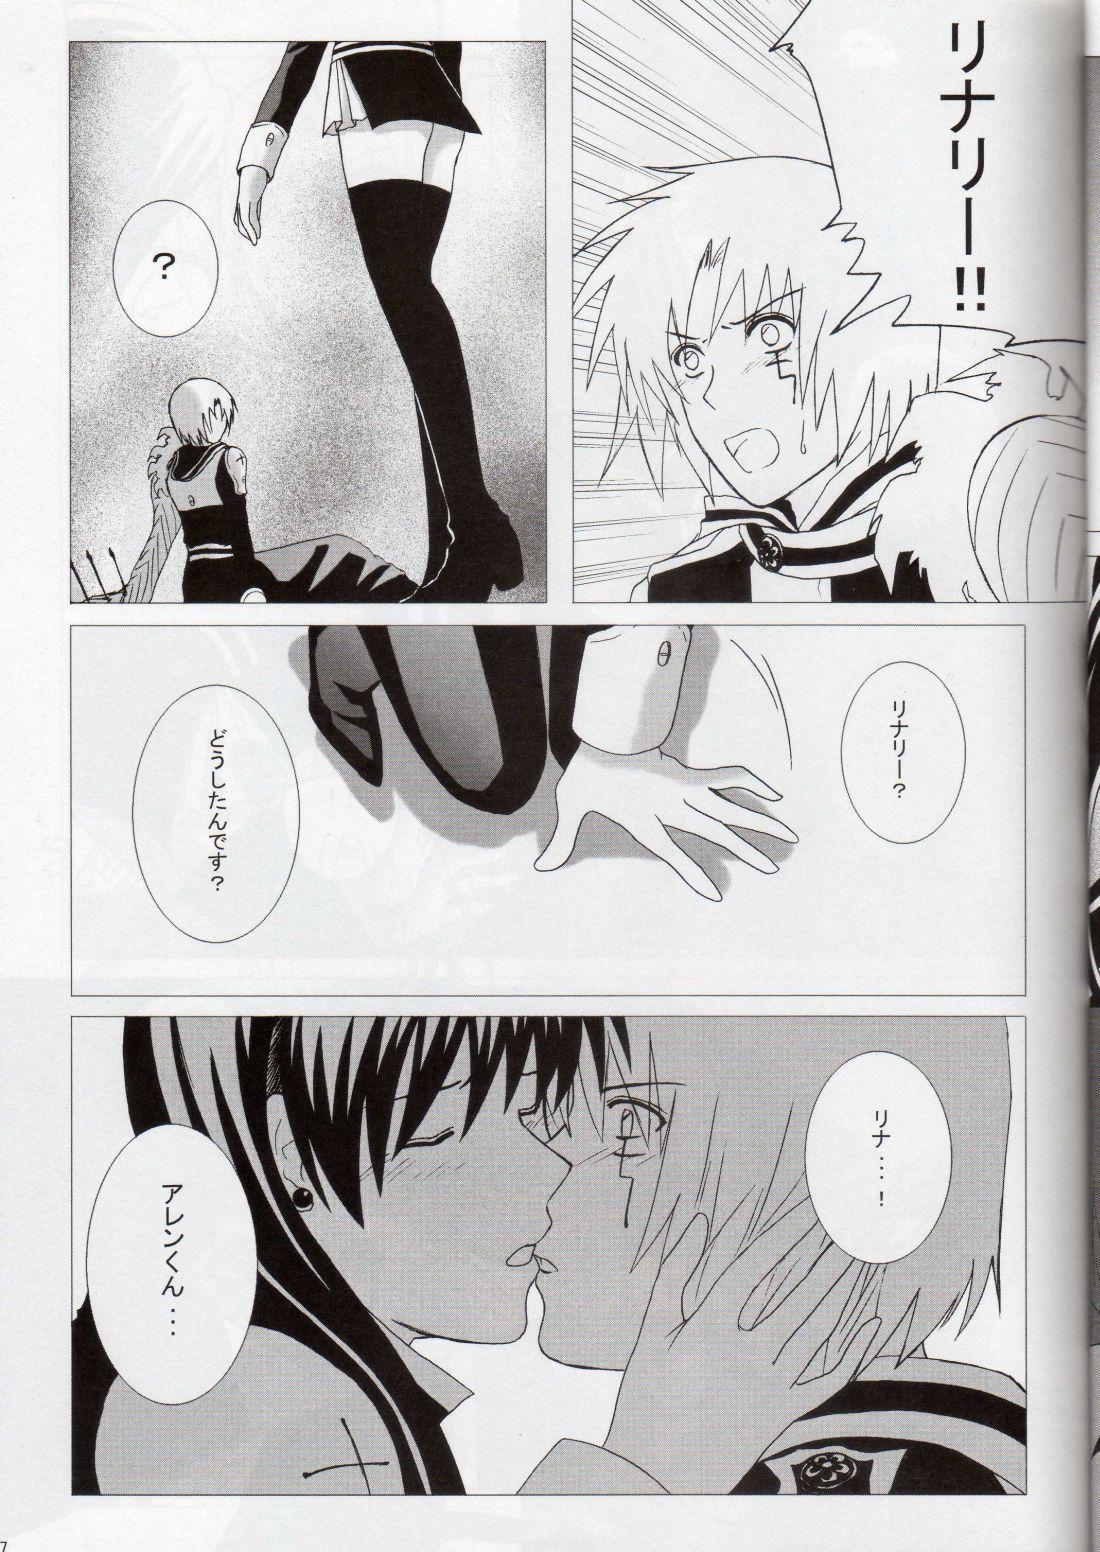 Sensual Star Shaft - D.gray man Interview - Page 6